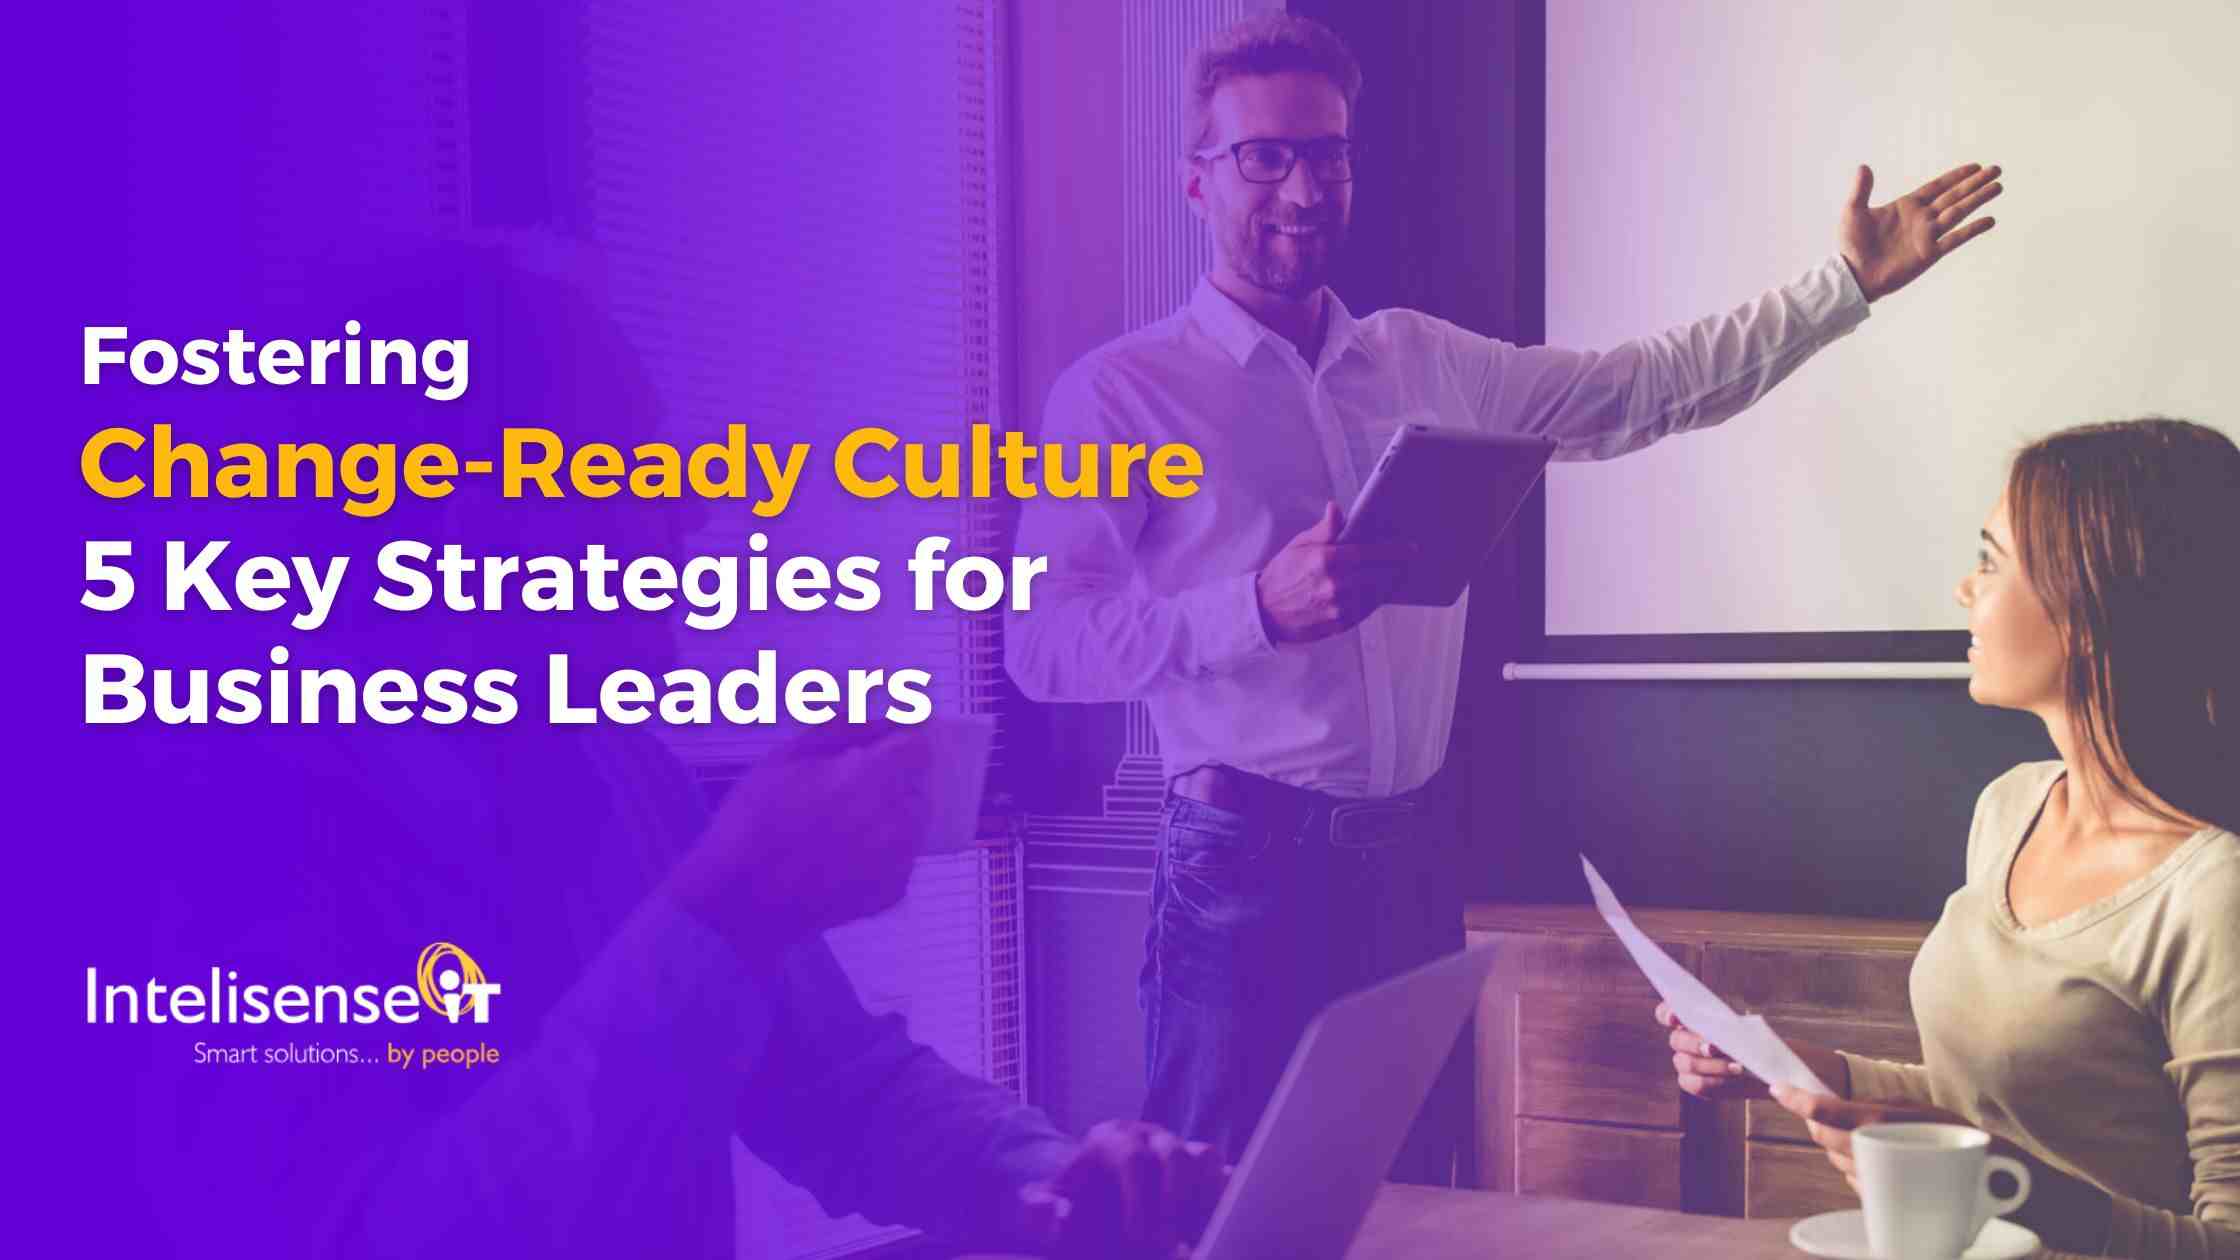 Change-Ready Culture